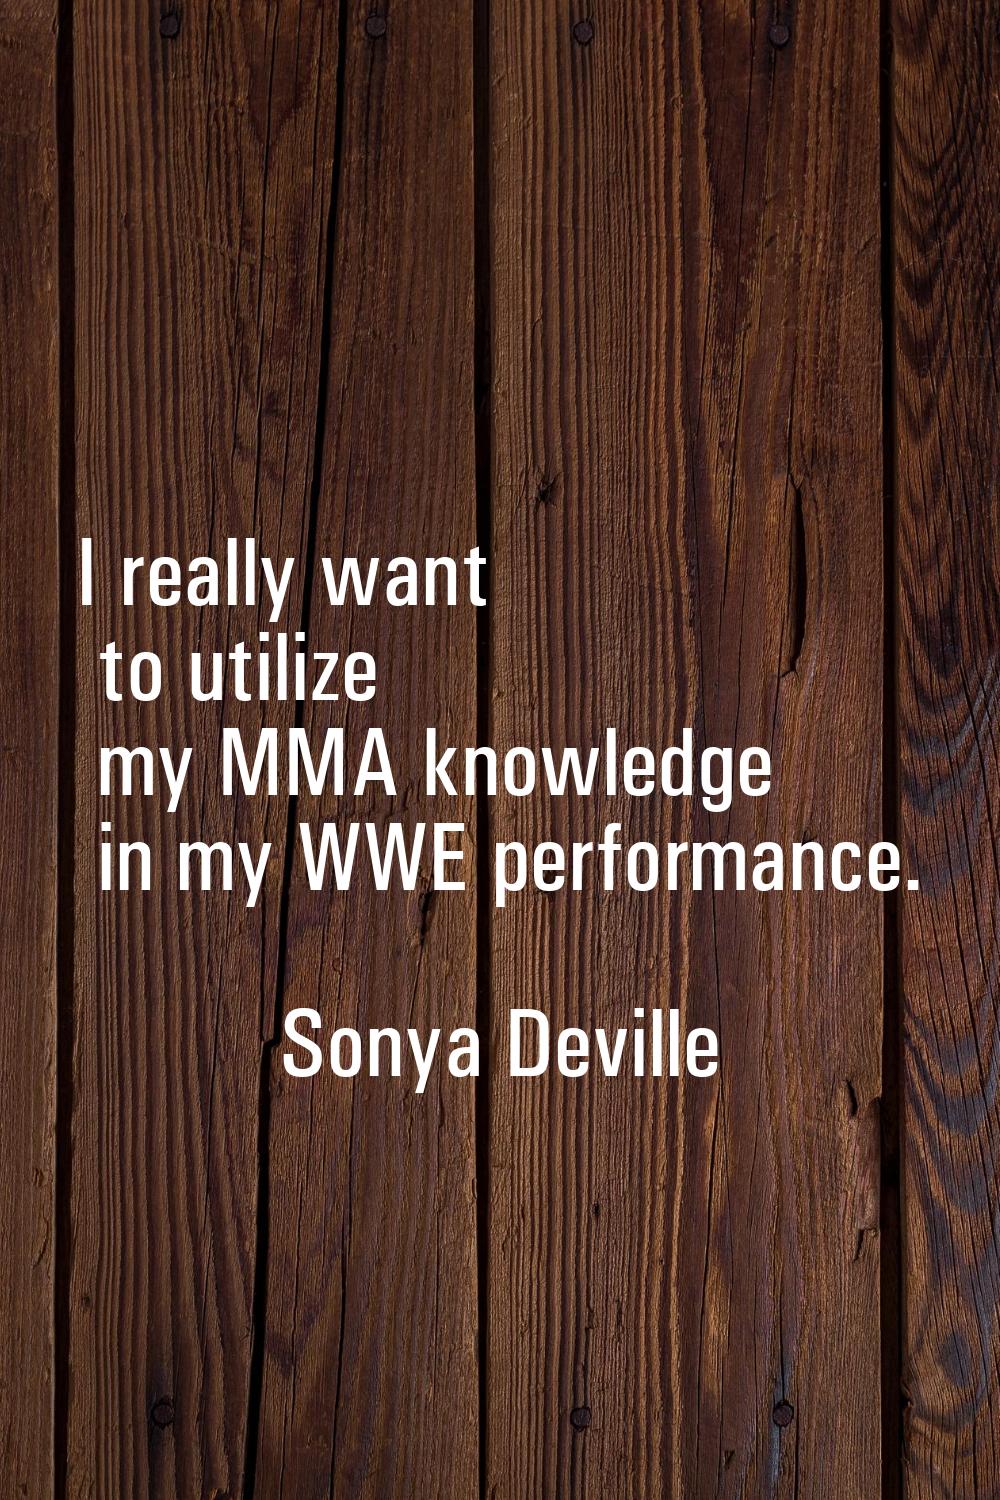 I really want to utilize my MMA knowledge in my WWE performance.